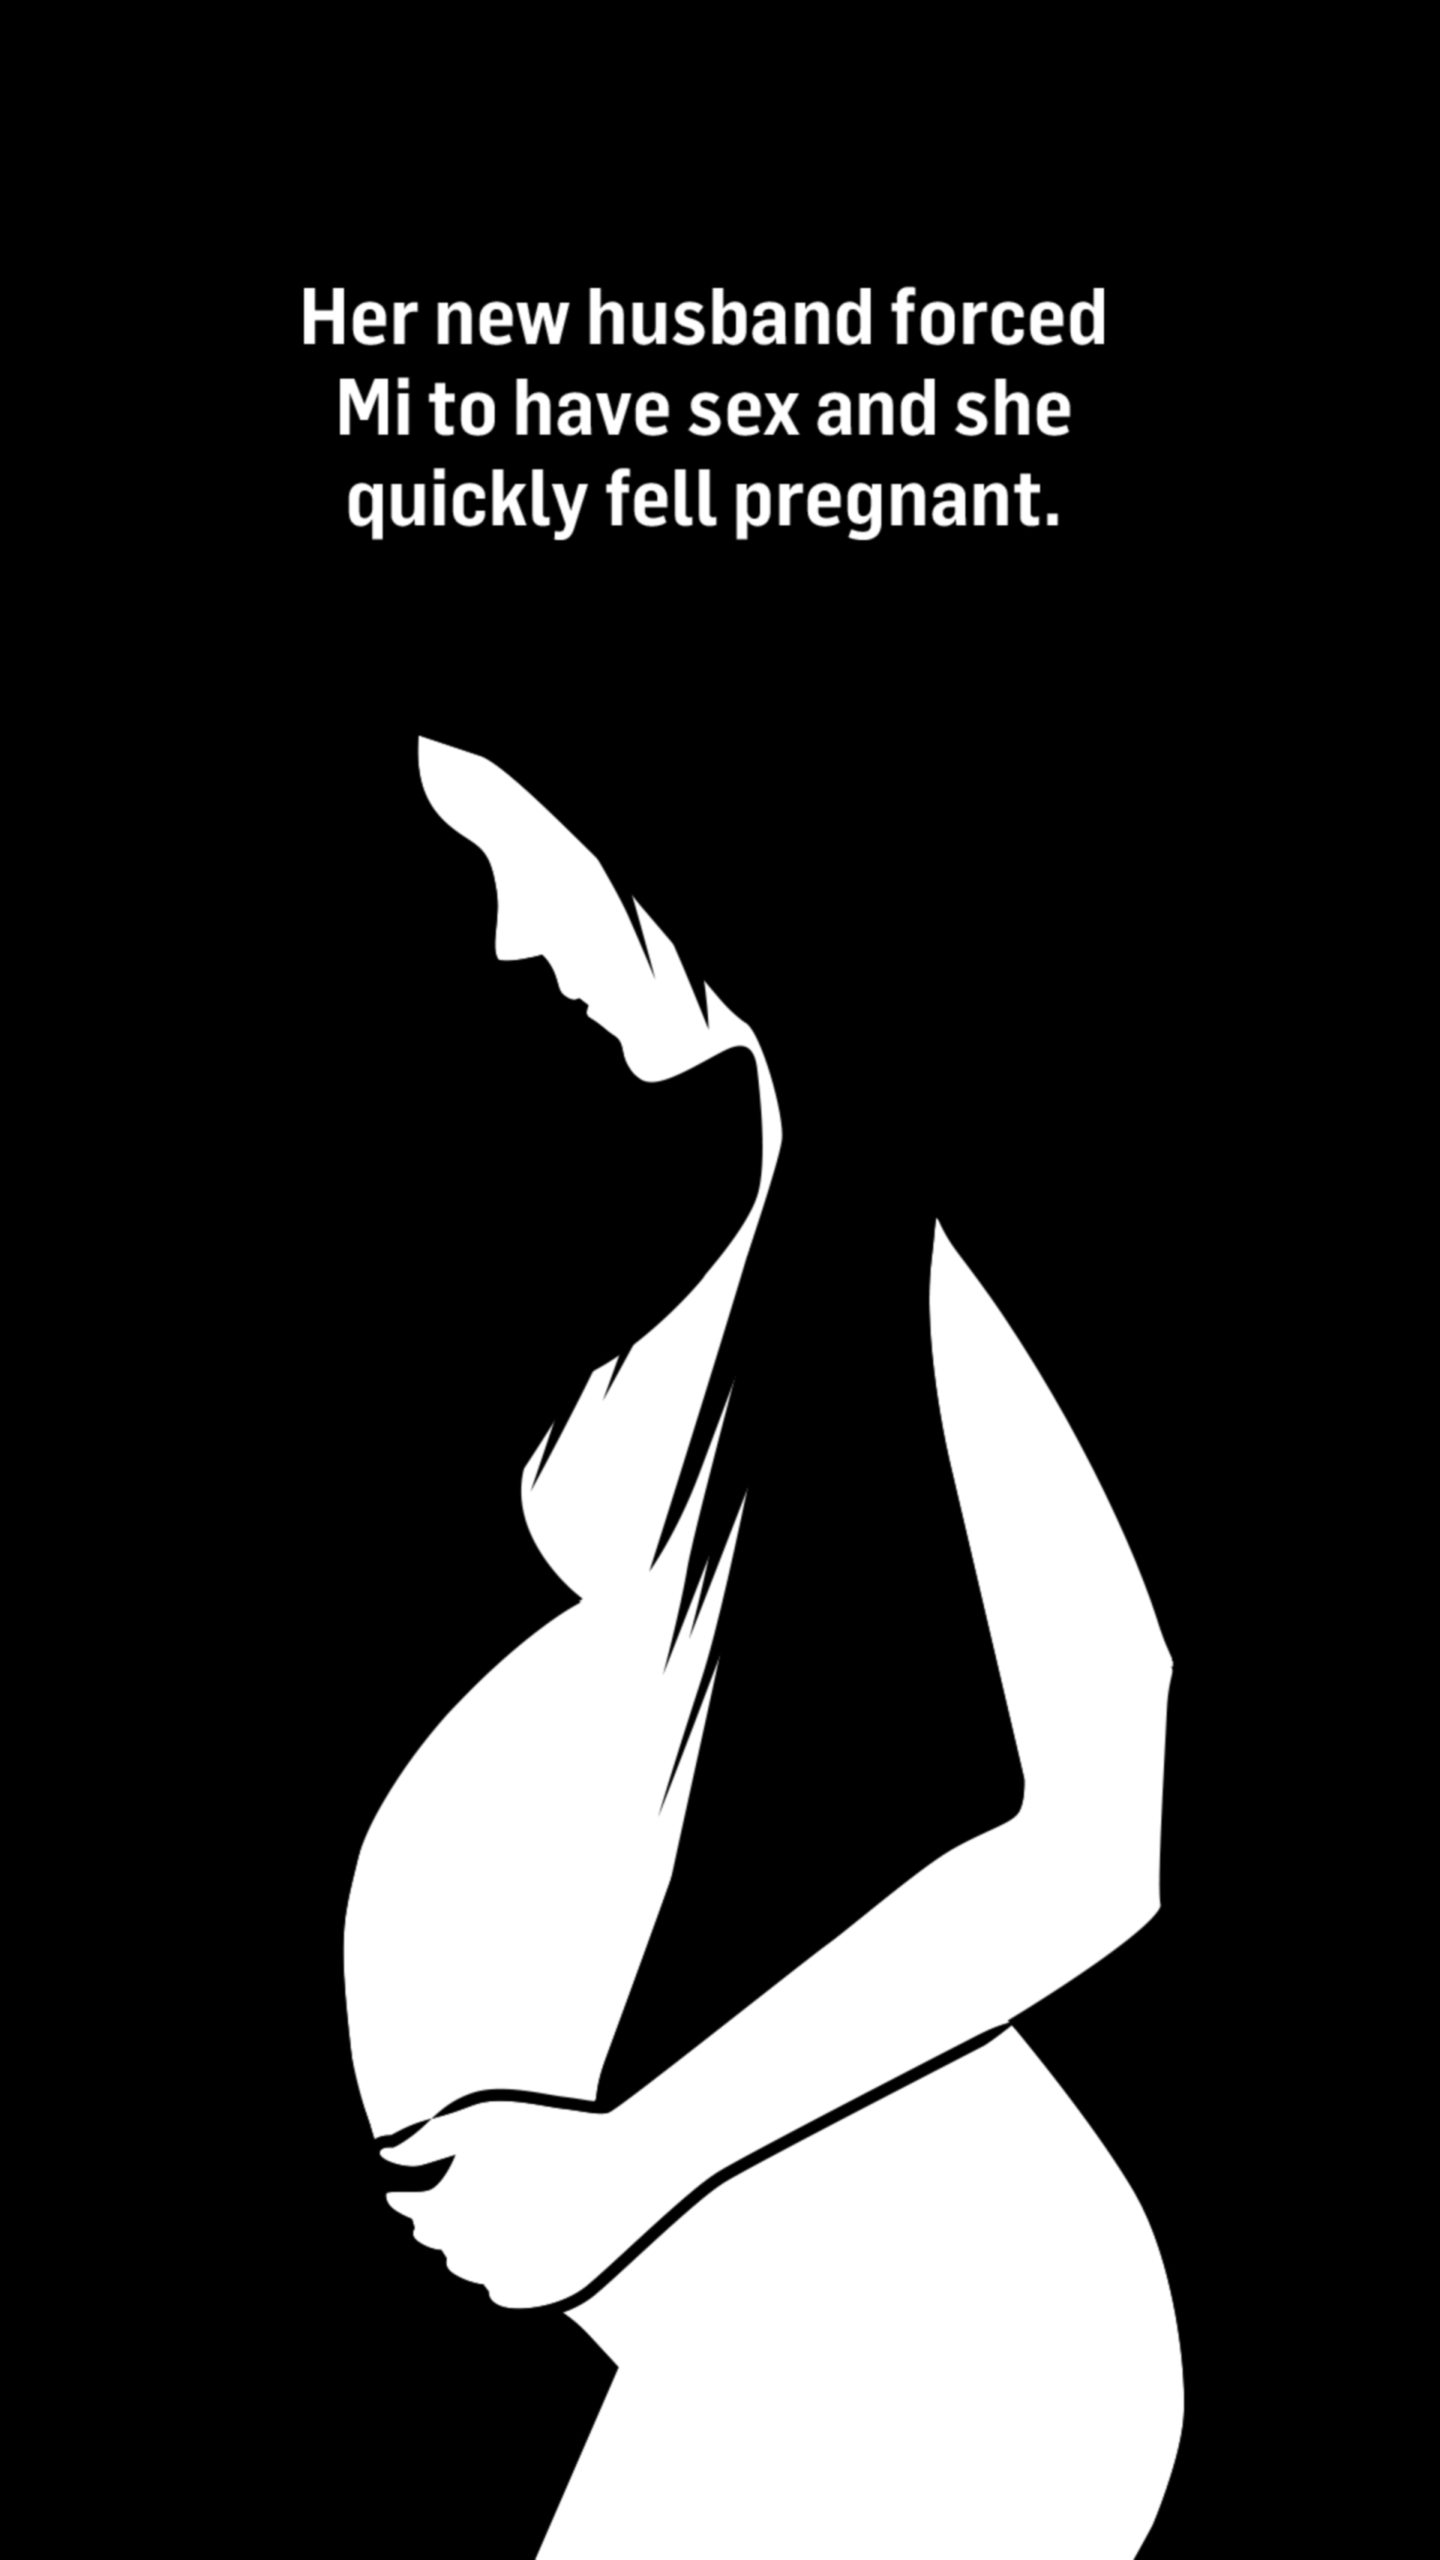 An illustration of a pregnant woman. Words above the image read: Her new husband forced Mi to have sex and she quickly fell pregnant.